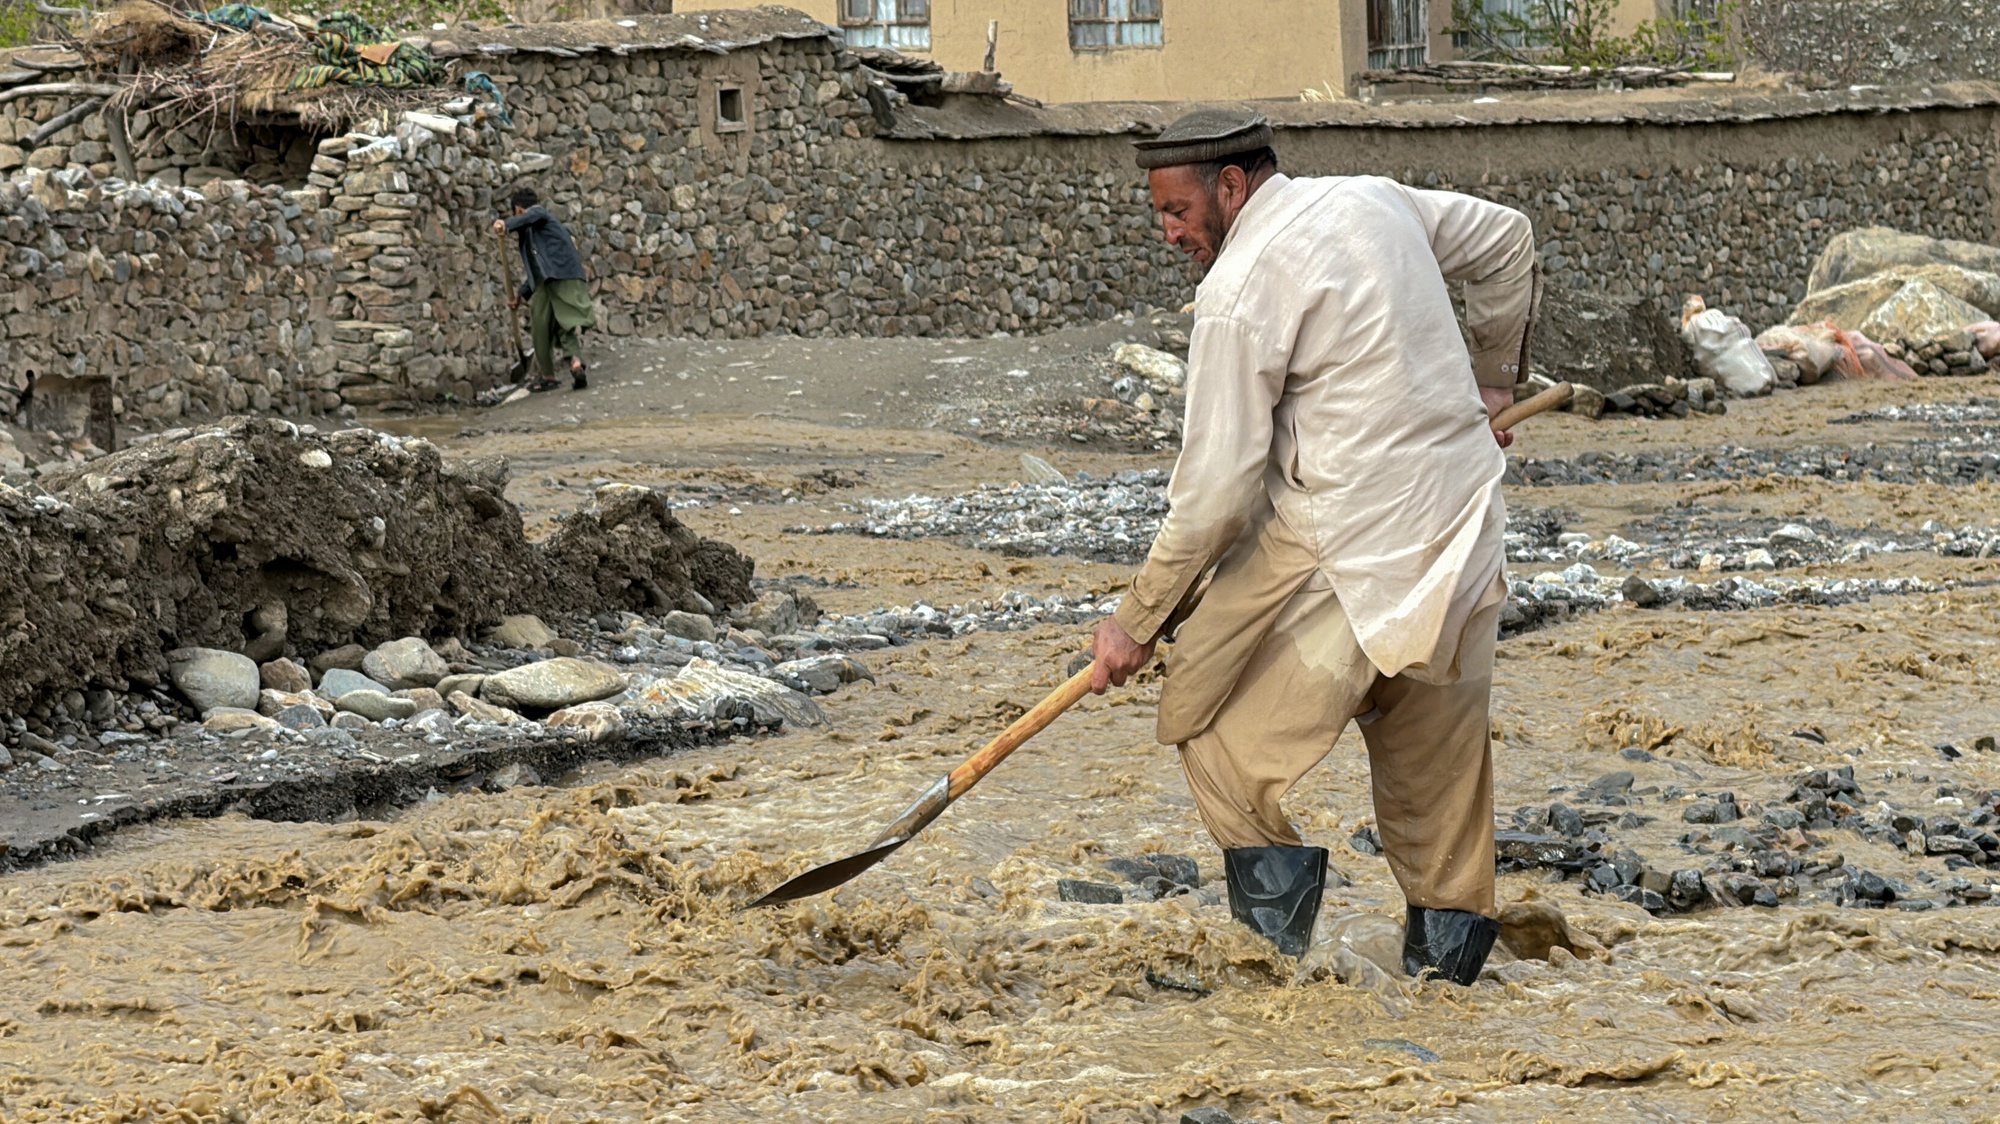 epa11287389 A person shovels stones on a damaged roads following flash floods in Ghorband district of Parwan province, Afghanistan, 18 April 2024. The death toll in incidents related to the heavy rains that have lashed Afghanistan since last week has increased to 50, while 36 have been injured, Ministry for Disaster Management spokesperson Mullah Janan Sayeq said. Heavy rains often cause sudden floods and landslides in the mountainous areas of Afghanistan, due to, among other reasons, poor infrastructure following decades of armed conflict and fragile constructions.  EPA/SHAMRIZ SABAWOON